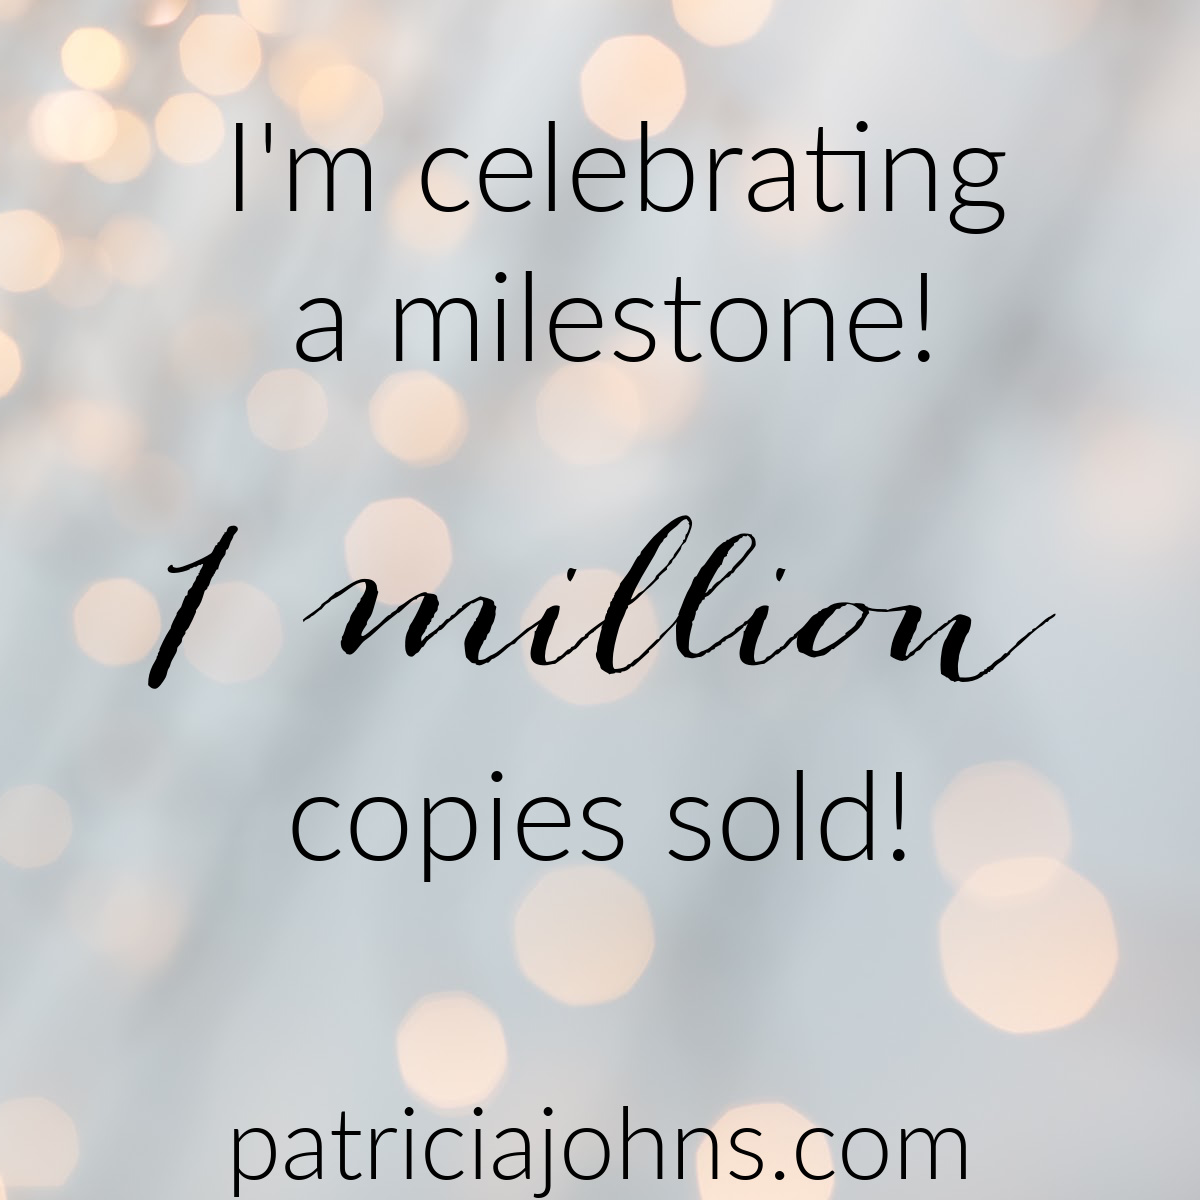 With special thanks to @HarlequinBooks and @KensingtonBooks who have brought my stories to the shelves... (and to @bethany_house who started counting!) this one snuck up on me! ONE MILLION copies of my books are out there in readers' hands! Thank you, thank you, thank you!